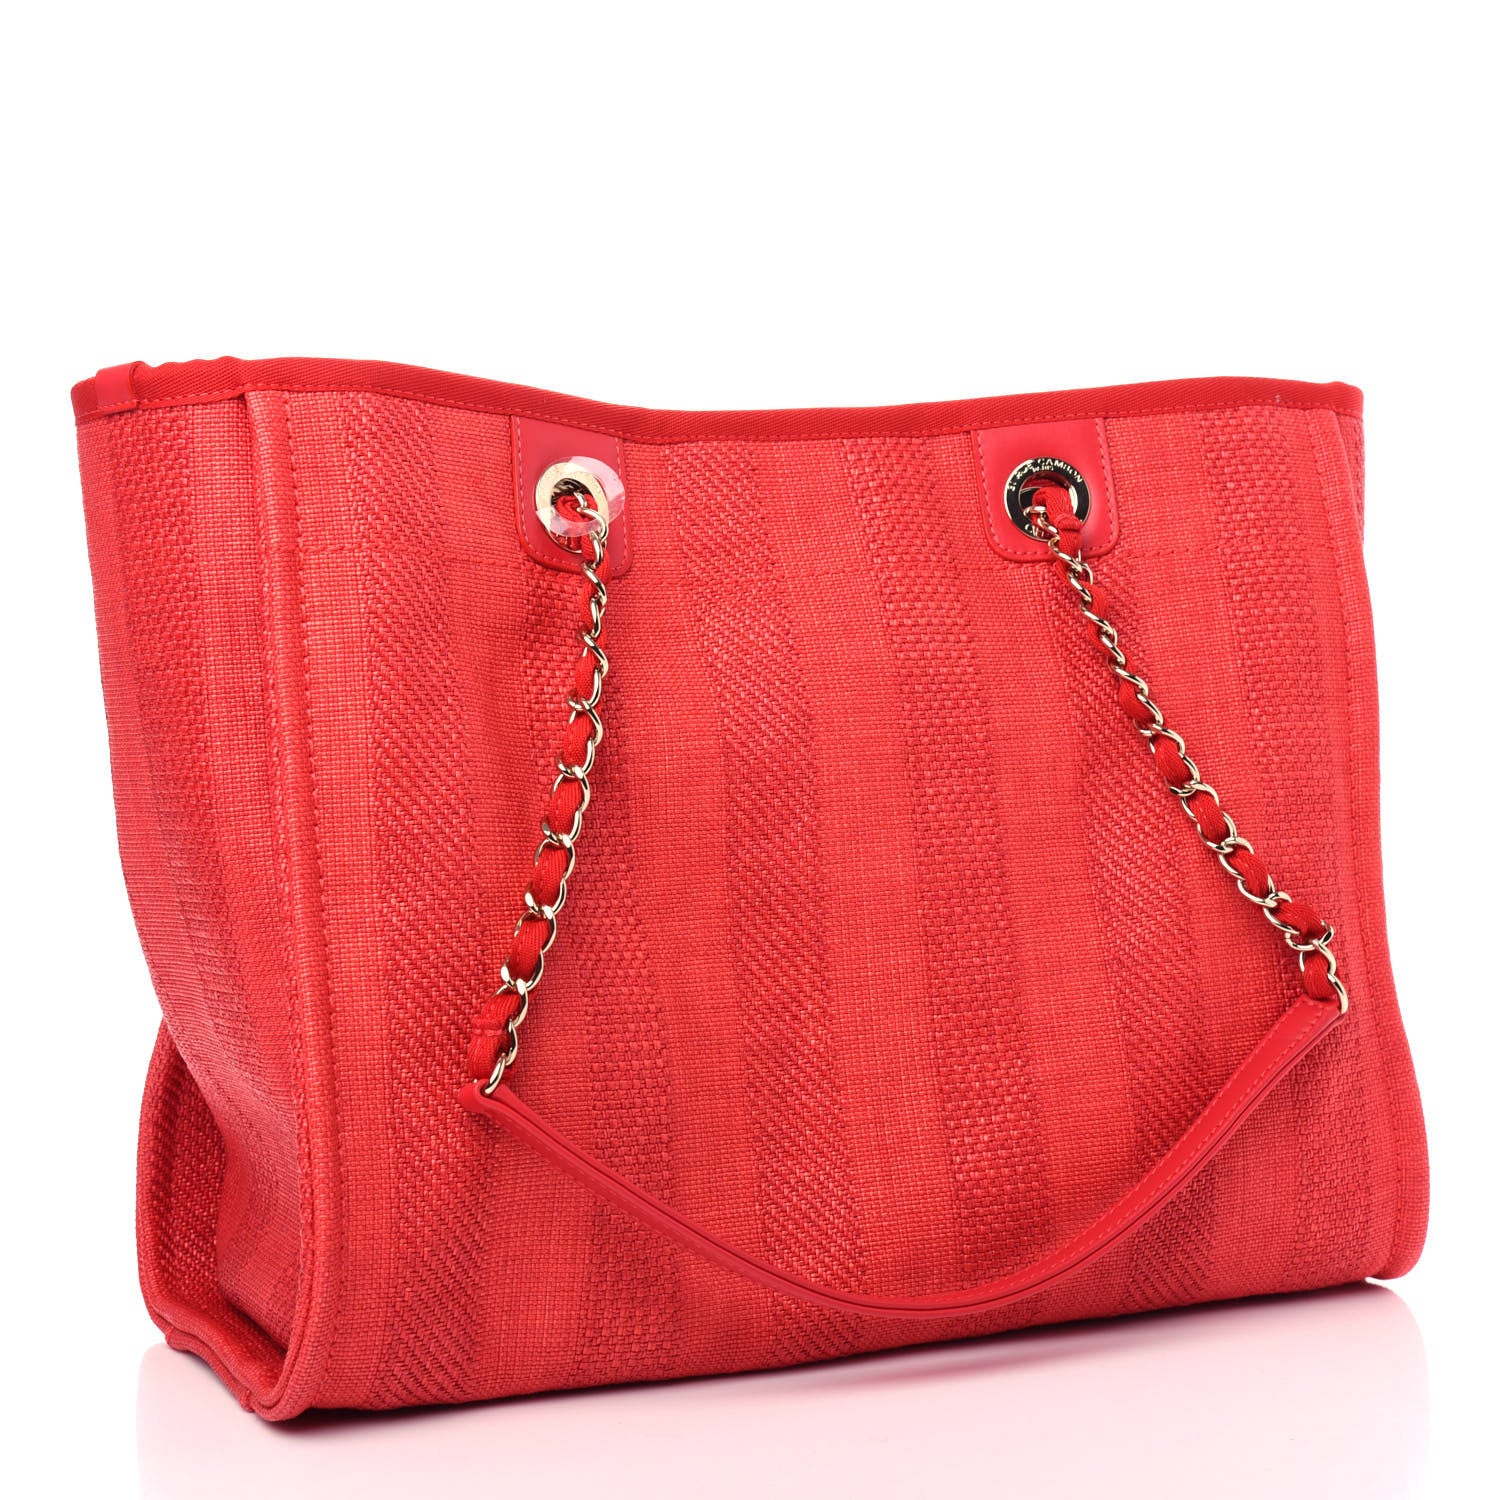 Chanel Canvas Medium Deauville Tote Red